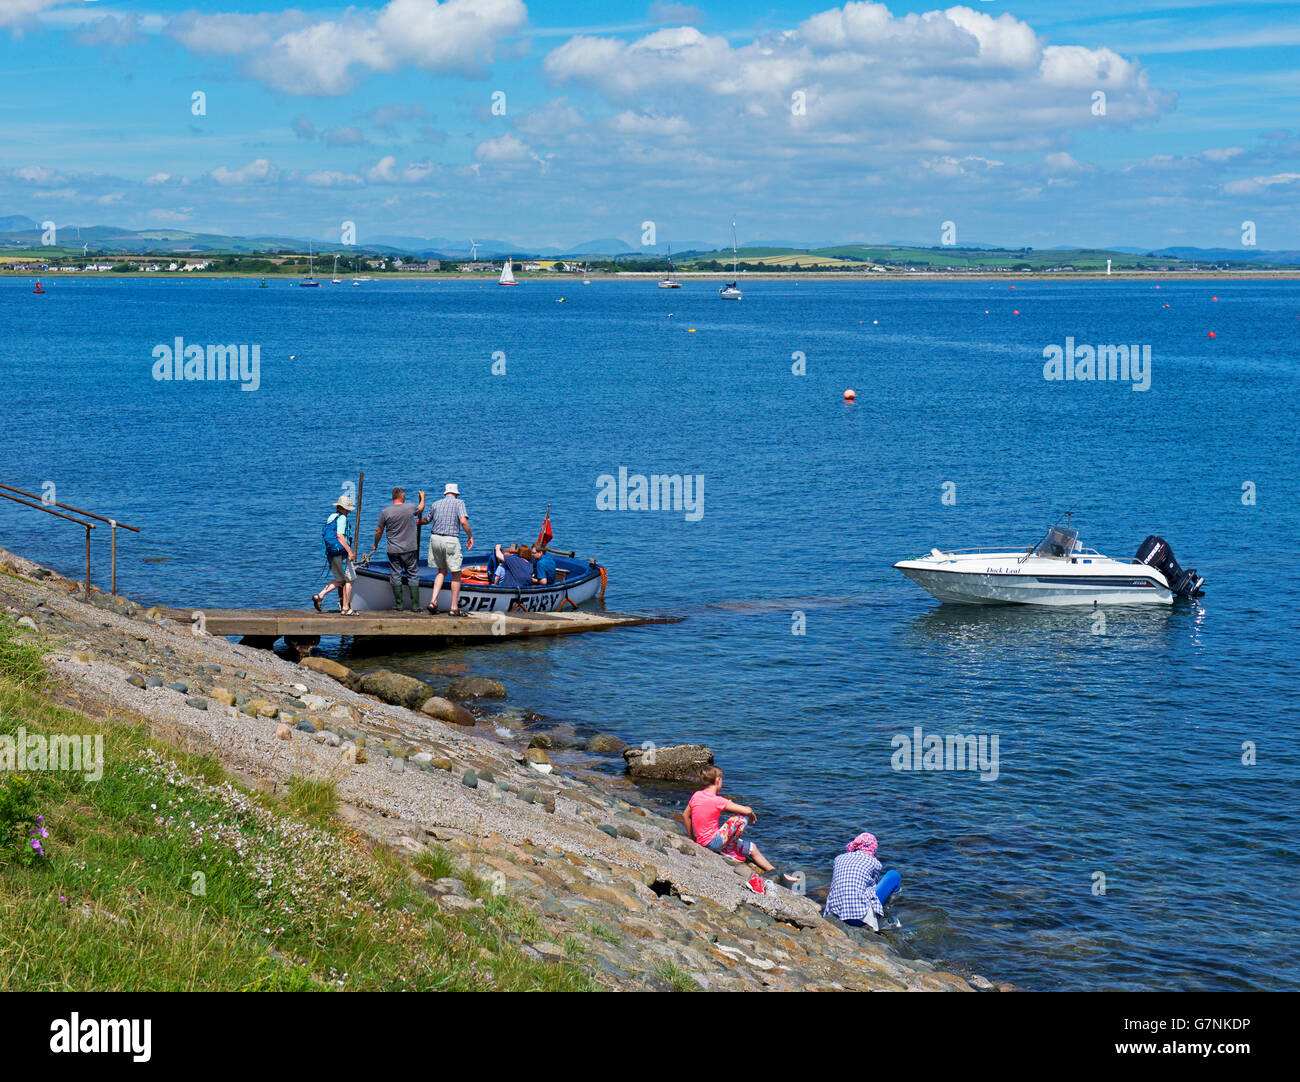 The ferry boat at the pier, Piel Island, near Barrow-in-Furness, Cumbria, England UK Stock Photo